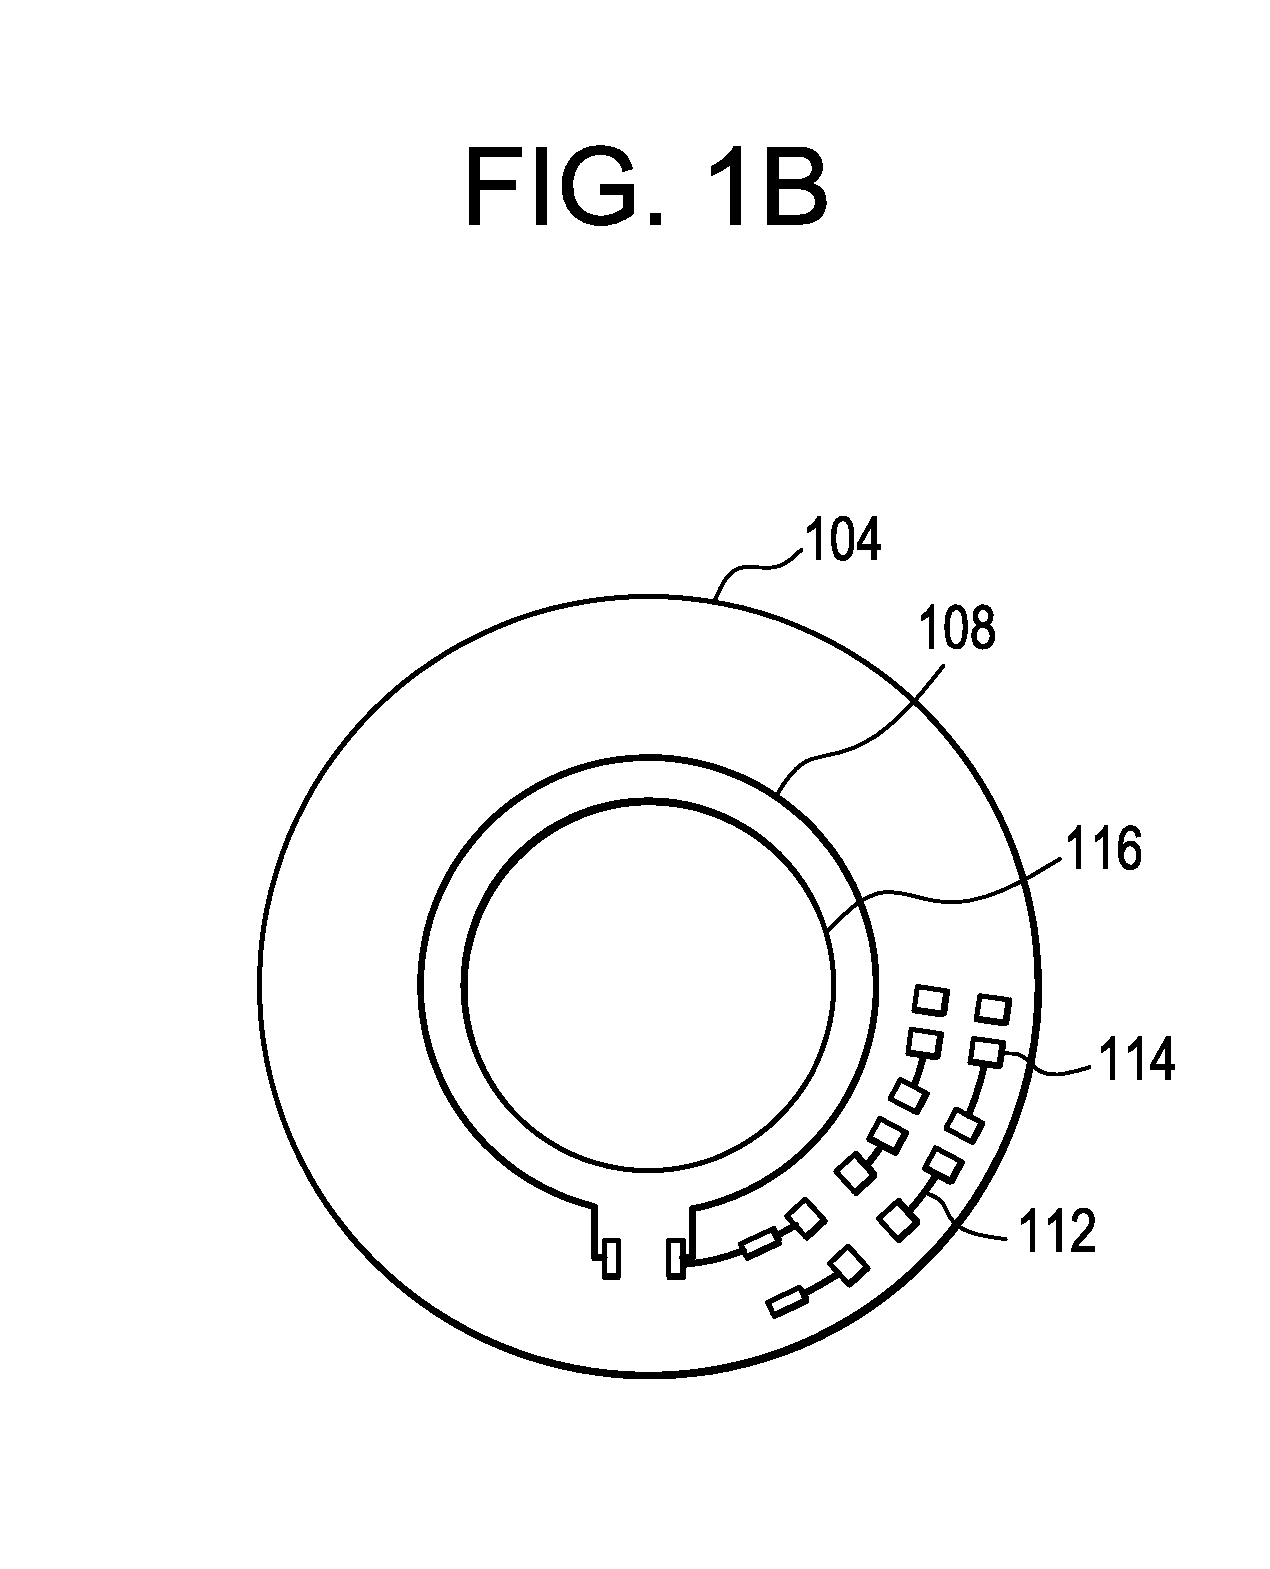 Ophthalmic lens assembly having an integrated antenna structure